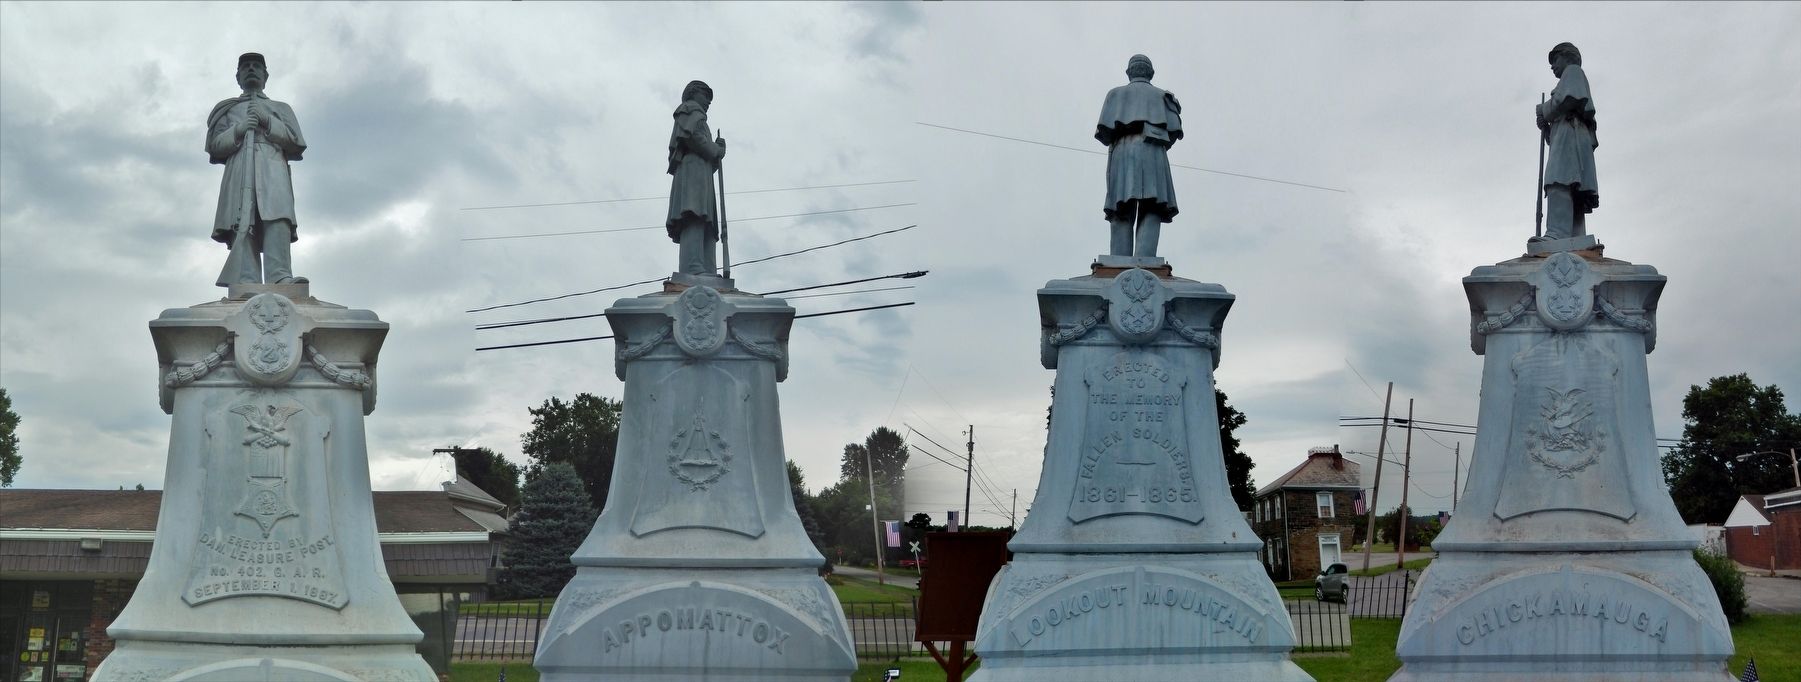 Daniel Leasure Monument (<i>composite view showing all four sides of monument</i>) image. Click for full size.